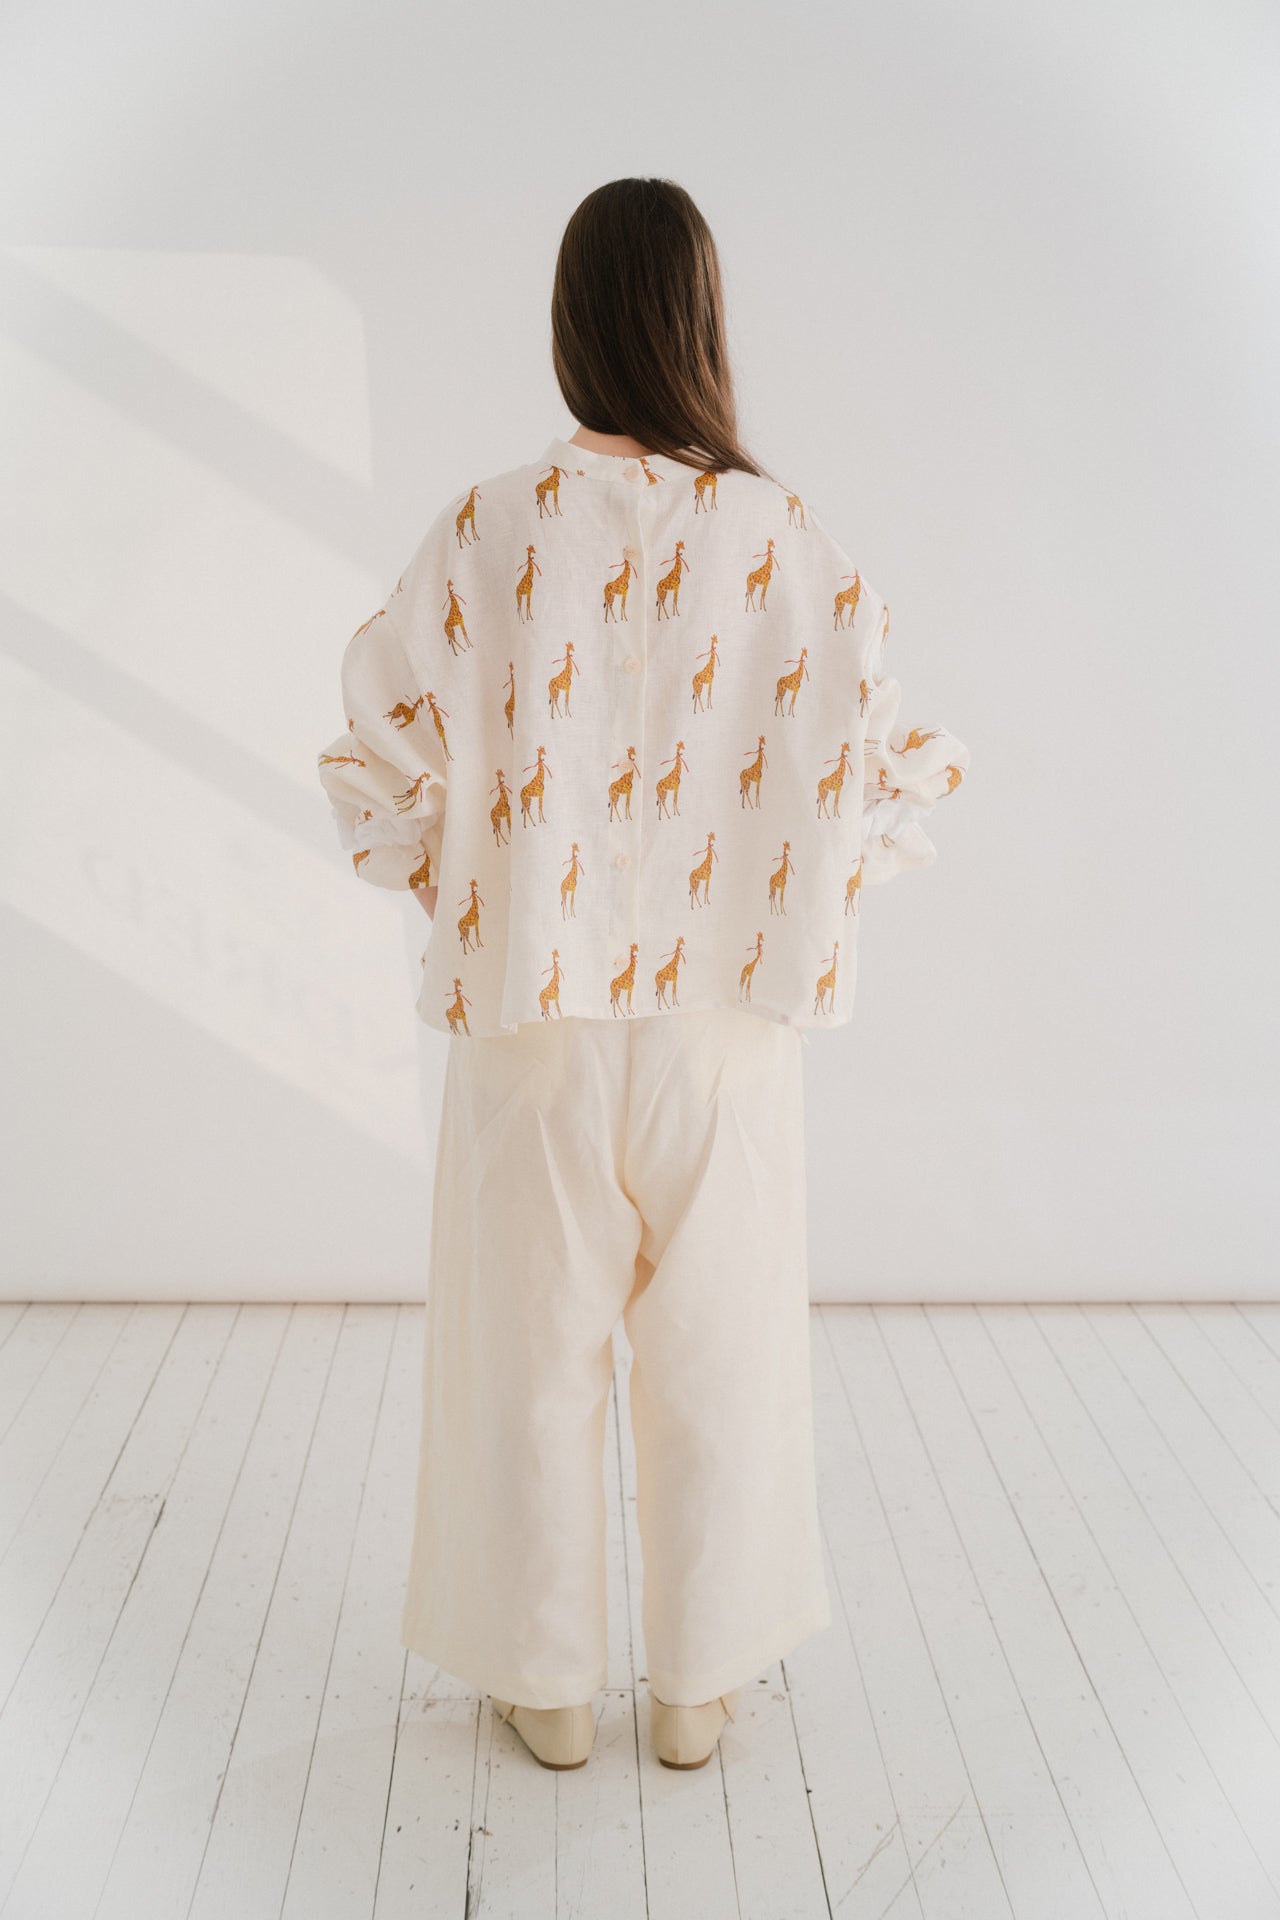 GIRAFFE PRINT SHIRT | Our most playful and fun piece from our SS24 collection. Our ‘Into The Wild’ concept was born out of an interest in the symbolism of the giraffe. Printed from a hand drawn watercolour painting by our designer Amy. Design adapted from